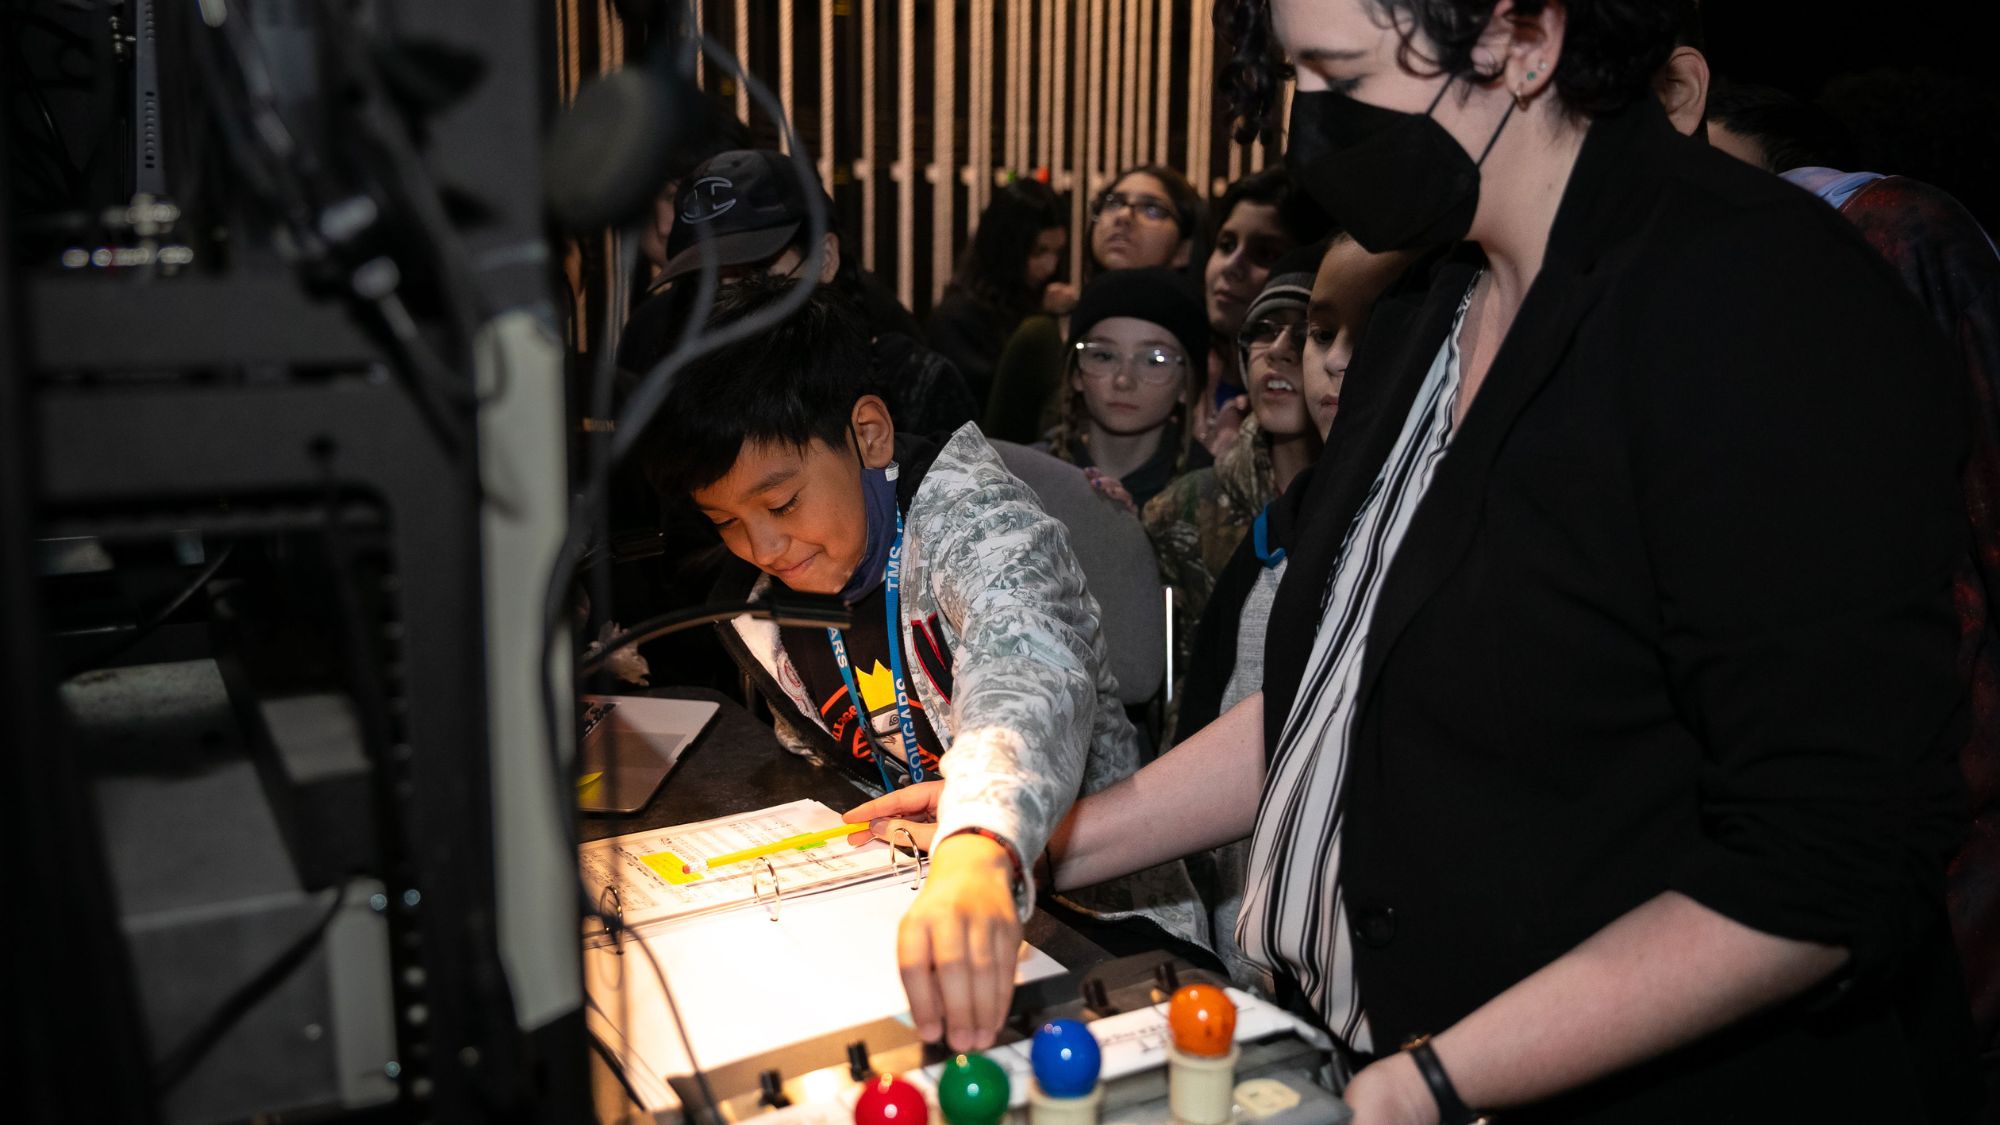 A young boy learns which buttons to push on a switchboard